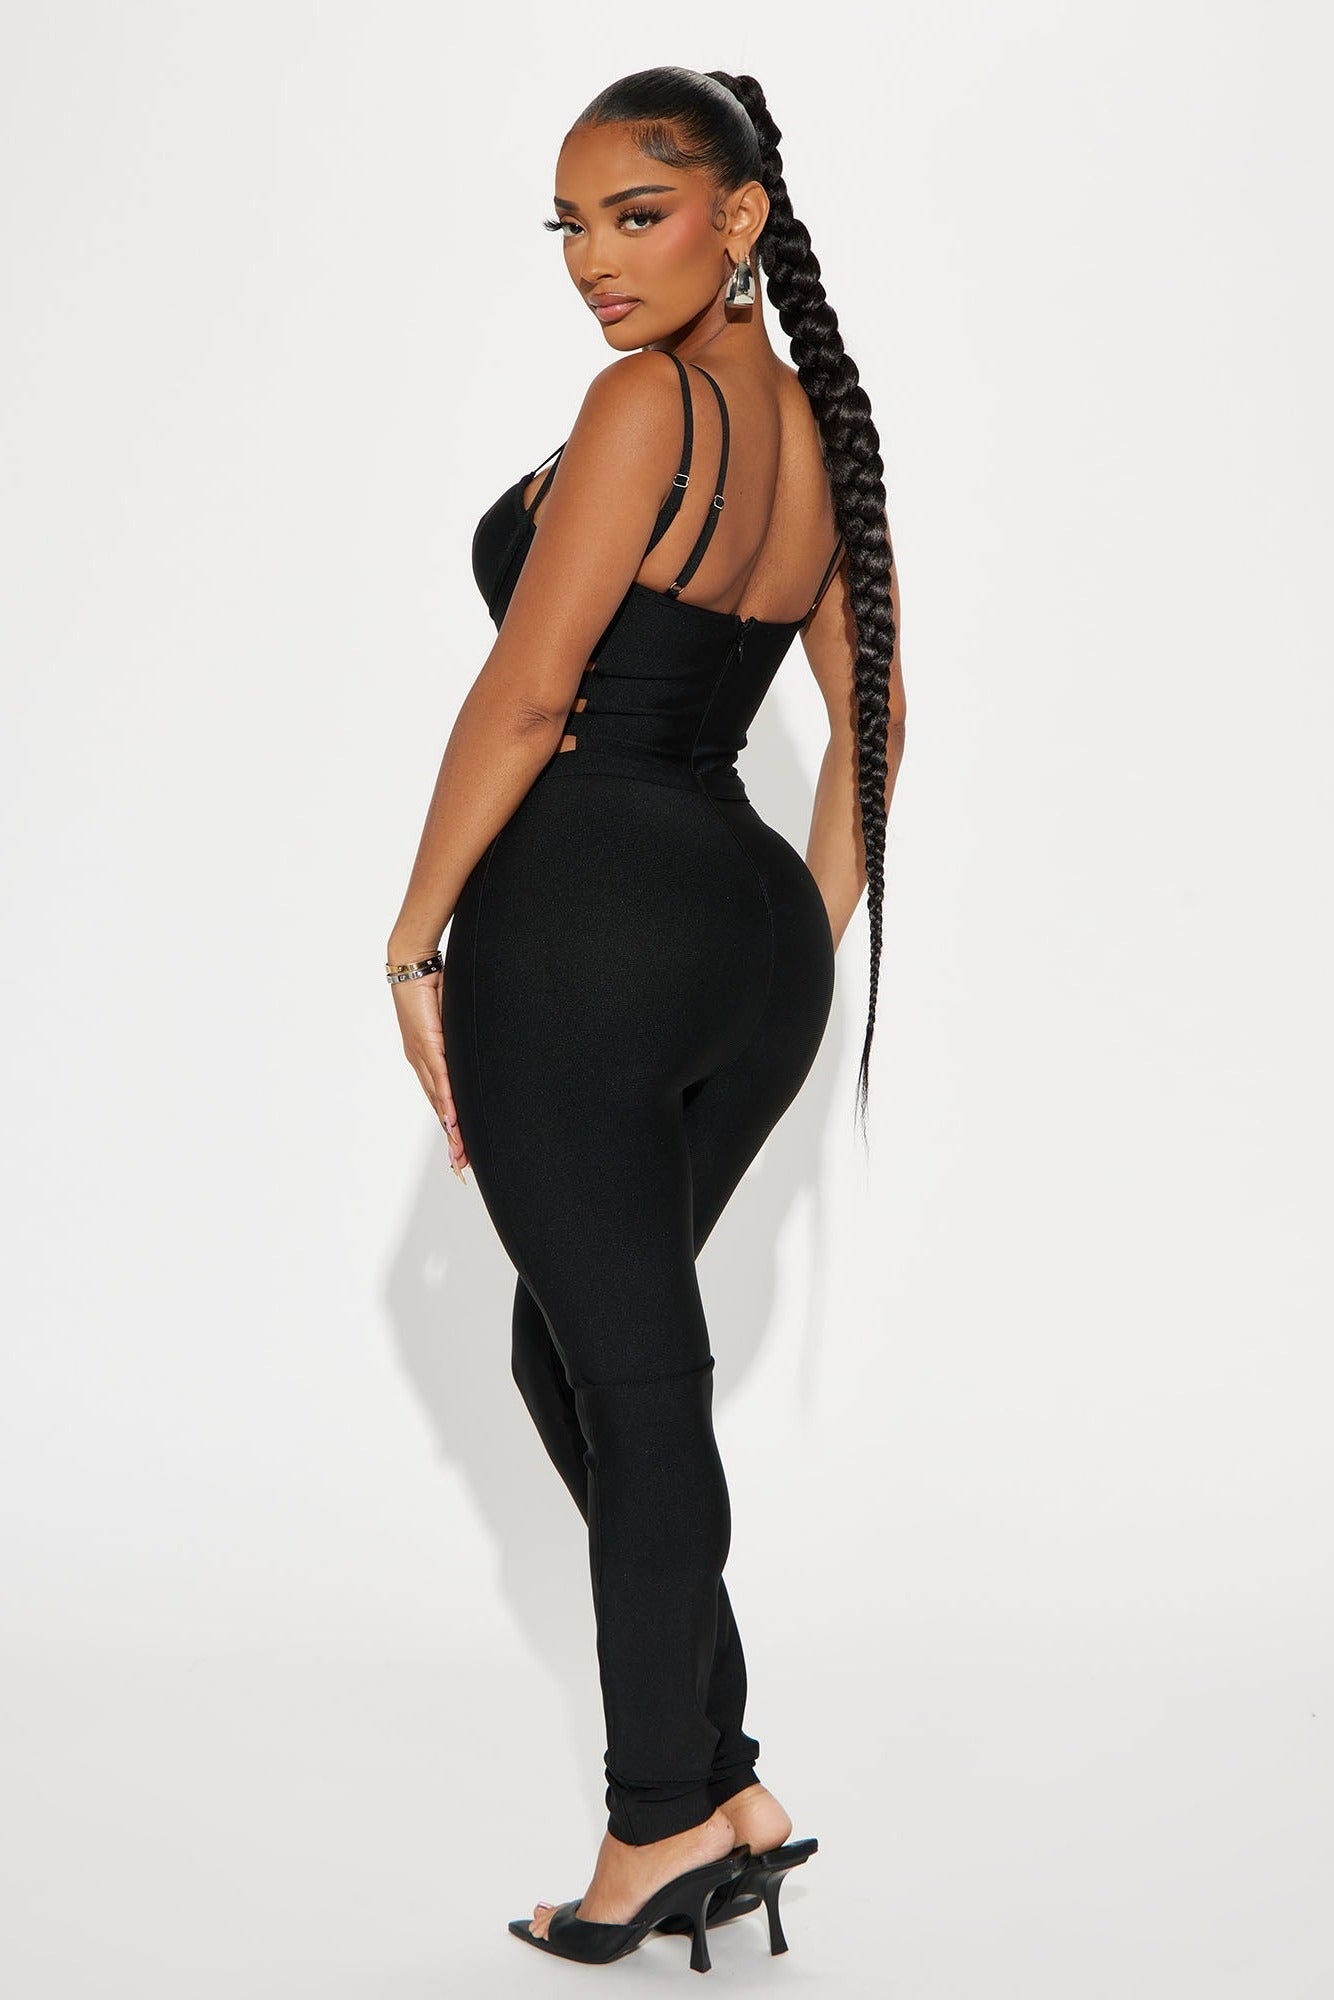 LLstyle In Bandage Black Jumpsuit